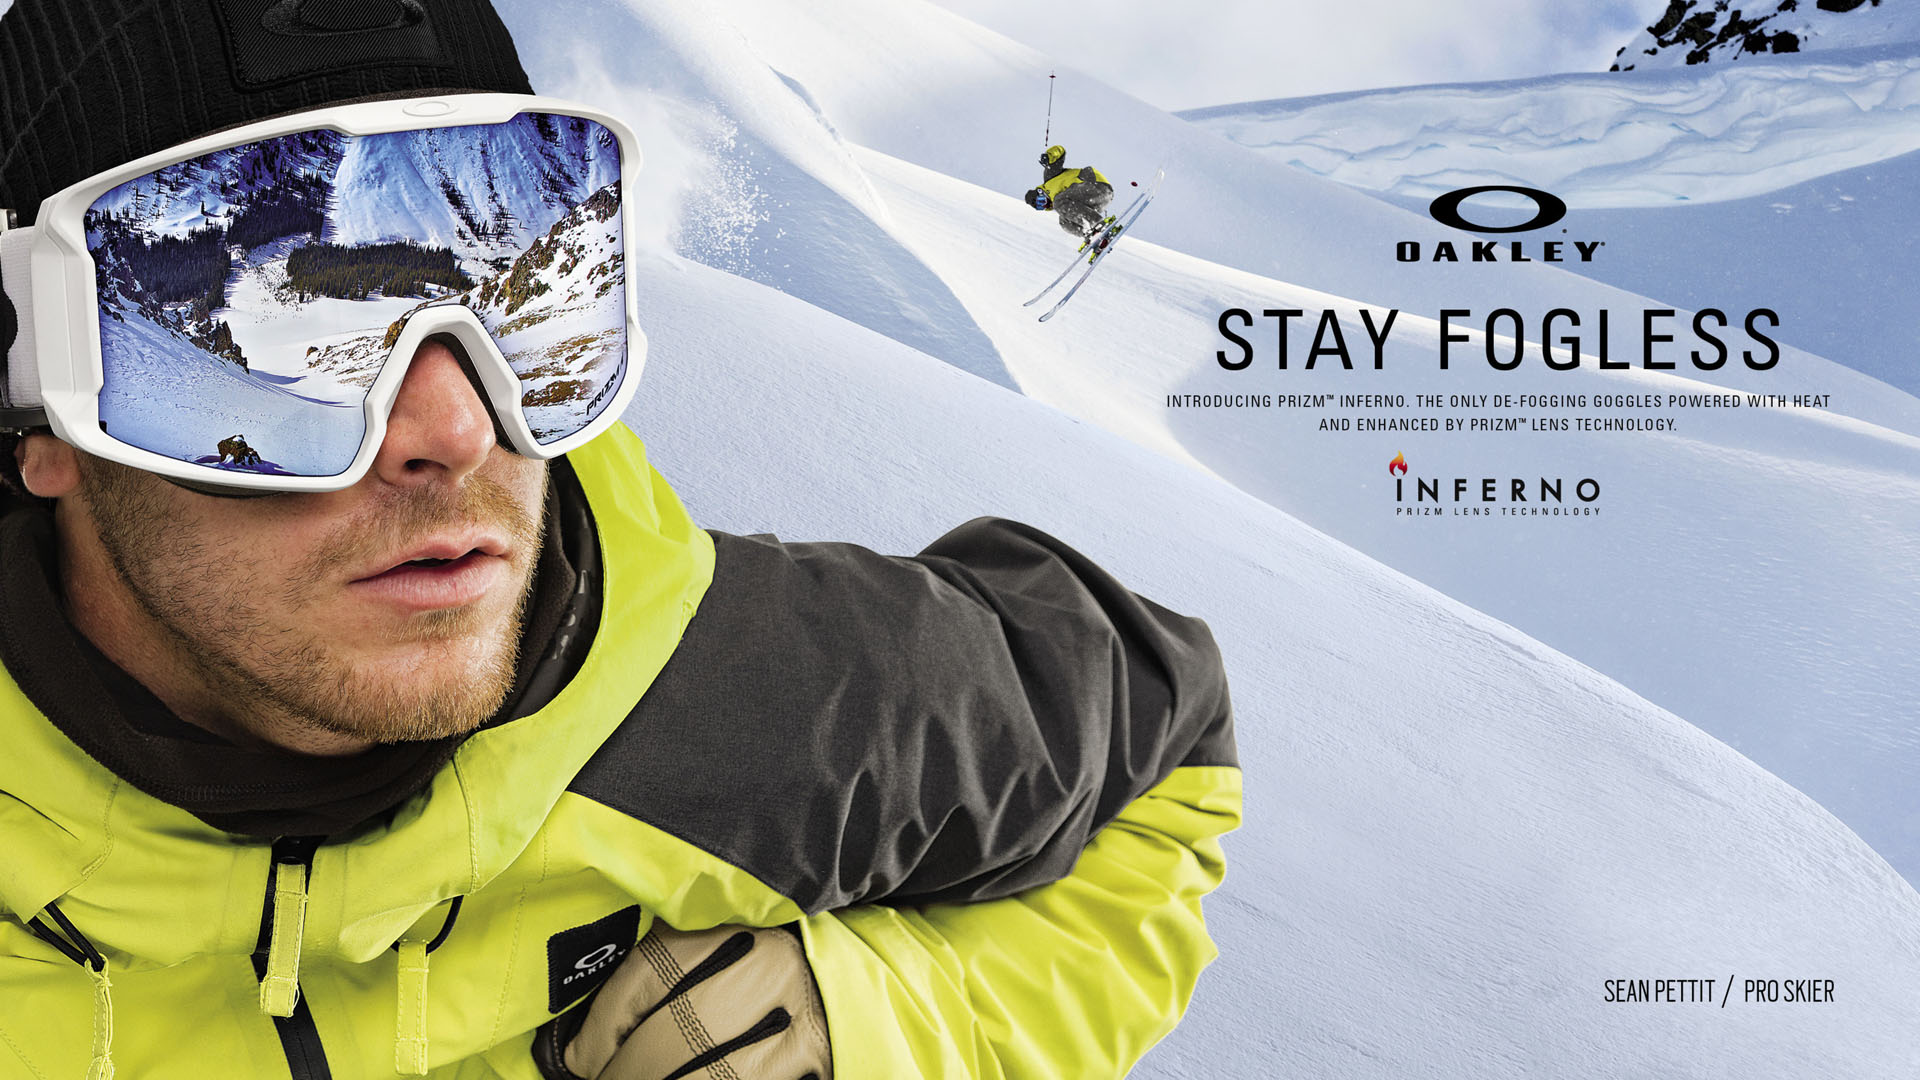 Oakley Goggles and Apparel advertisment